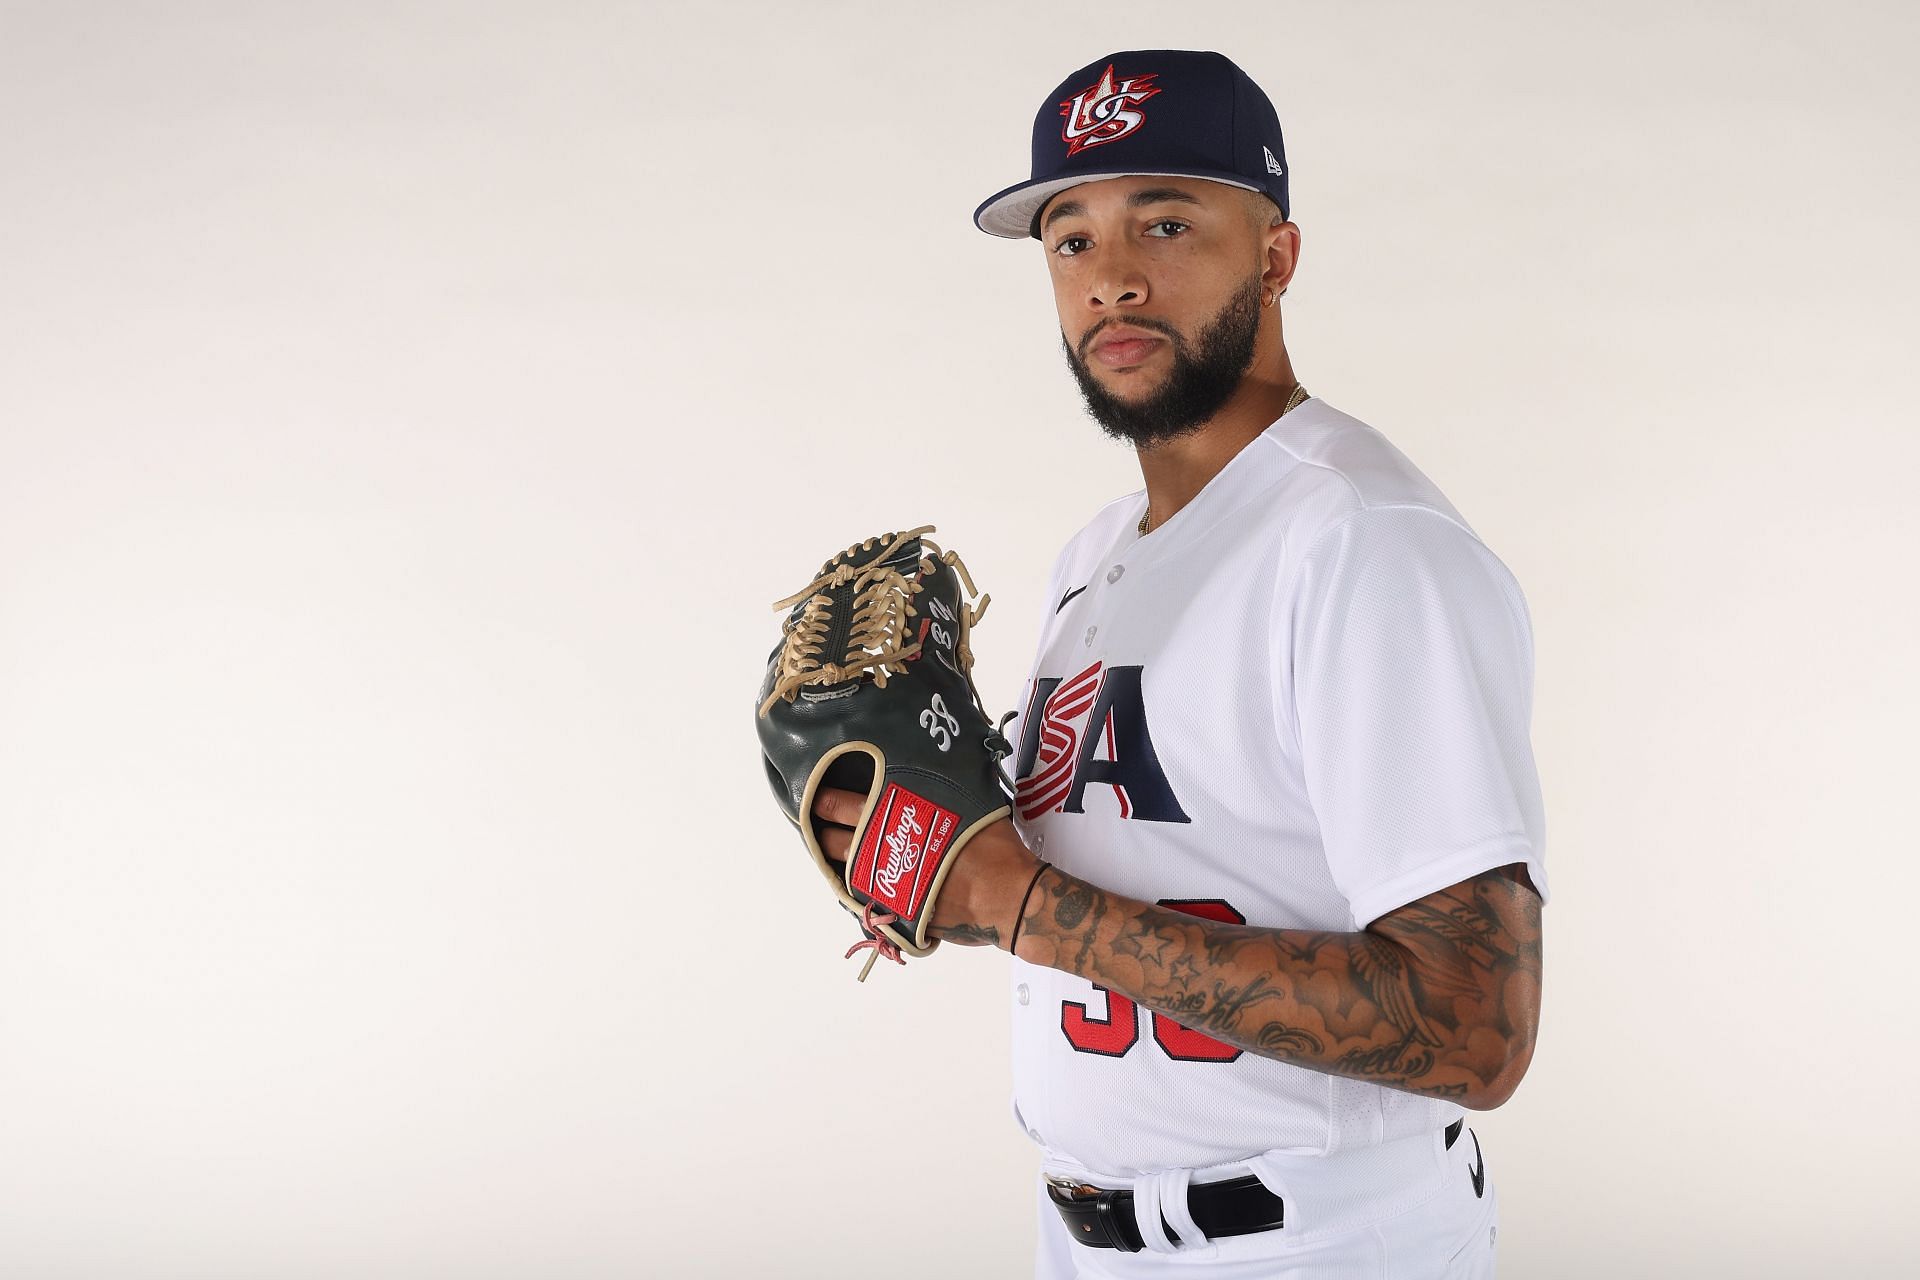 Pitcher Devin Williams #38 of Team USA poses for a portrait ahead of the World Baseball Classic